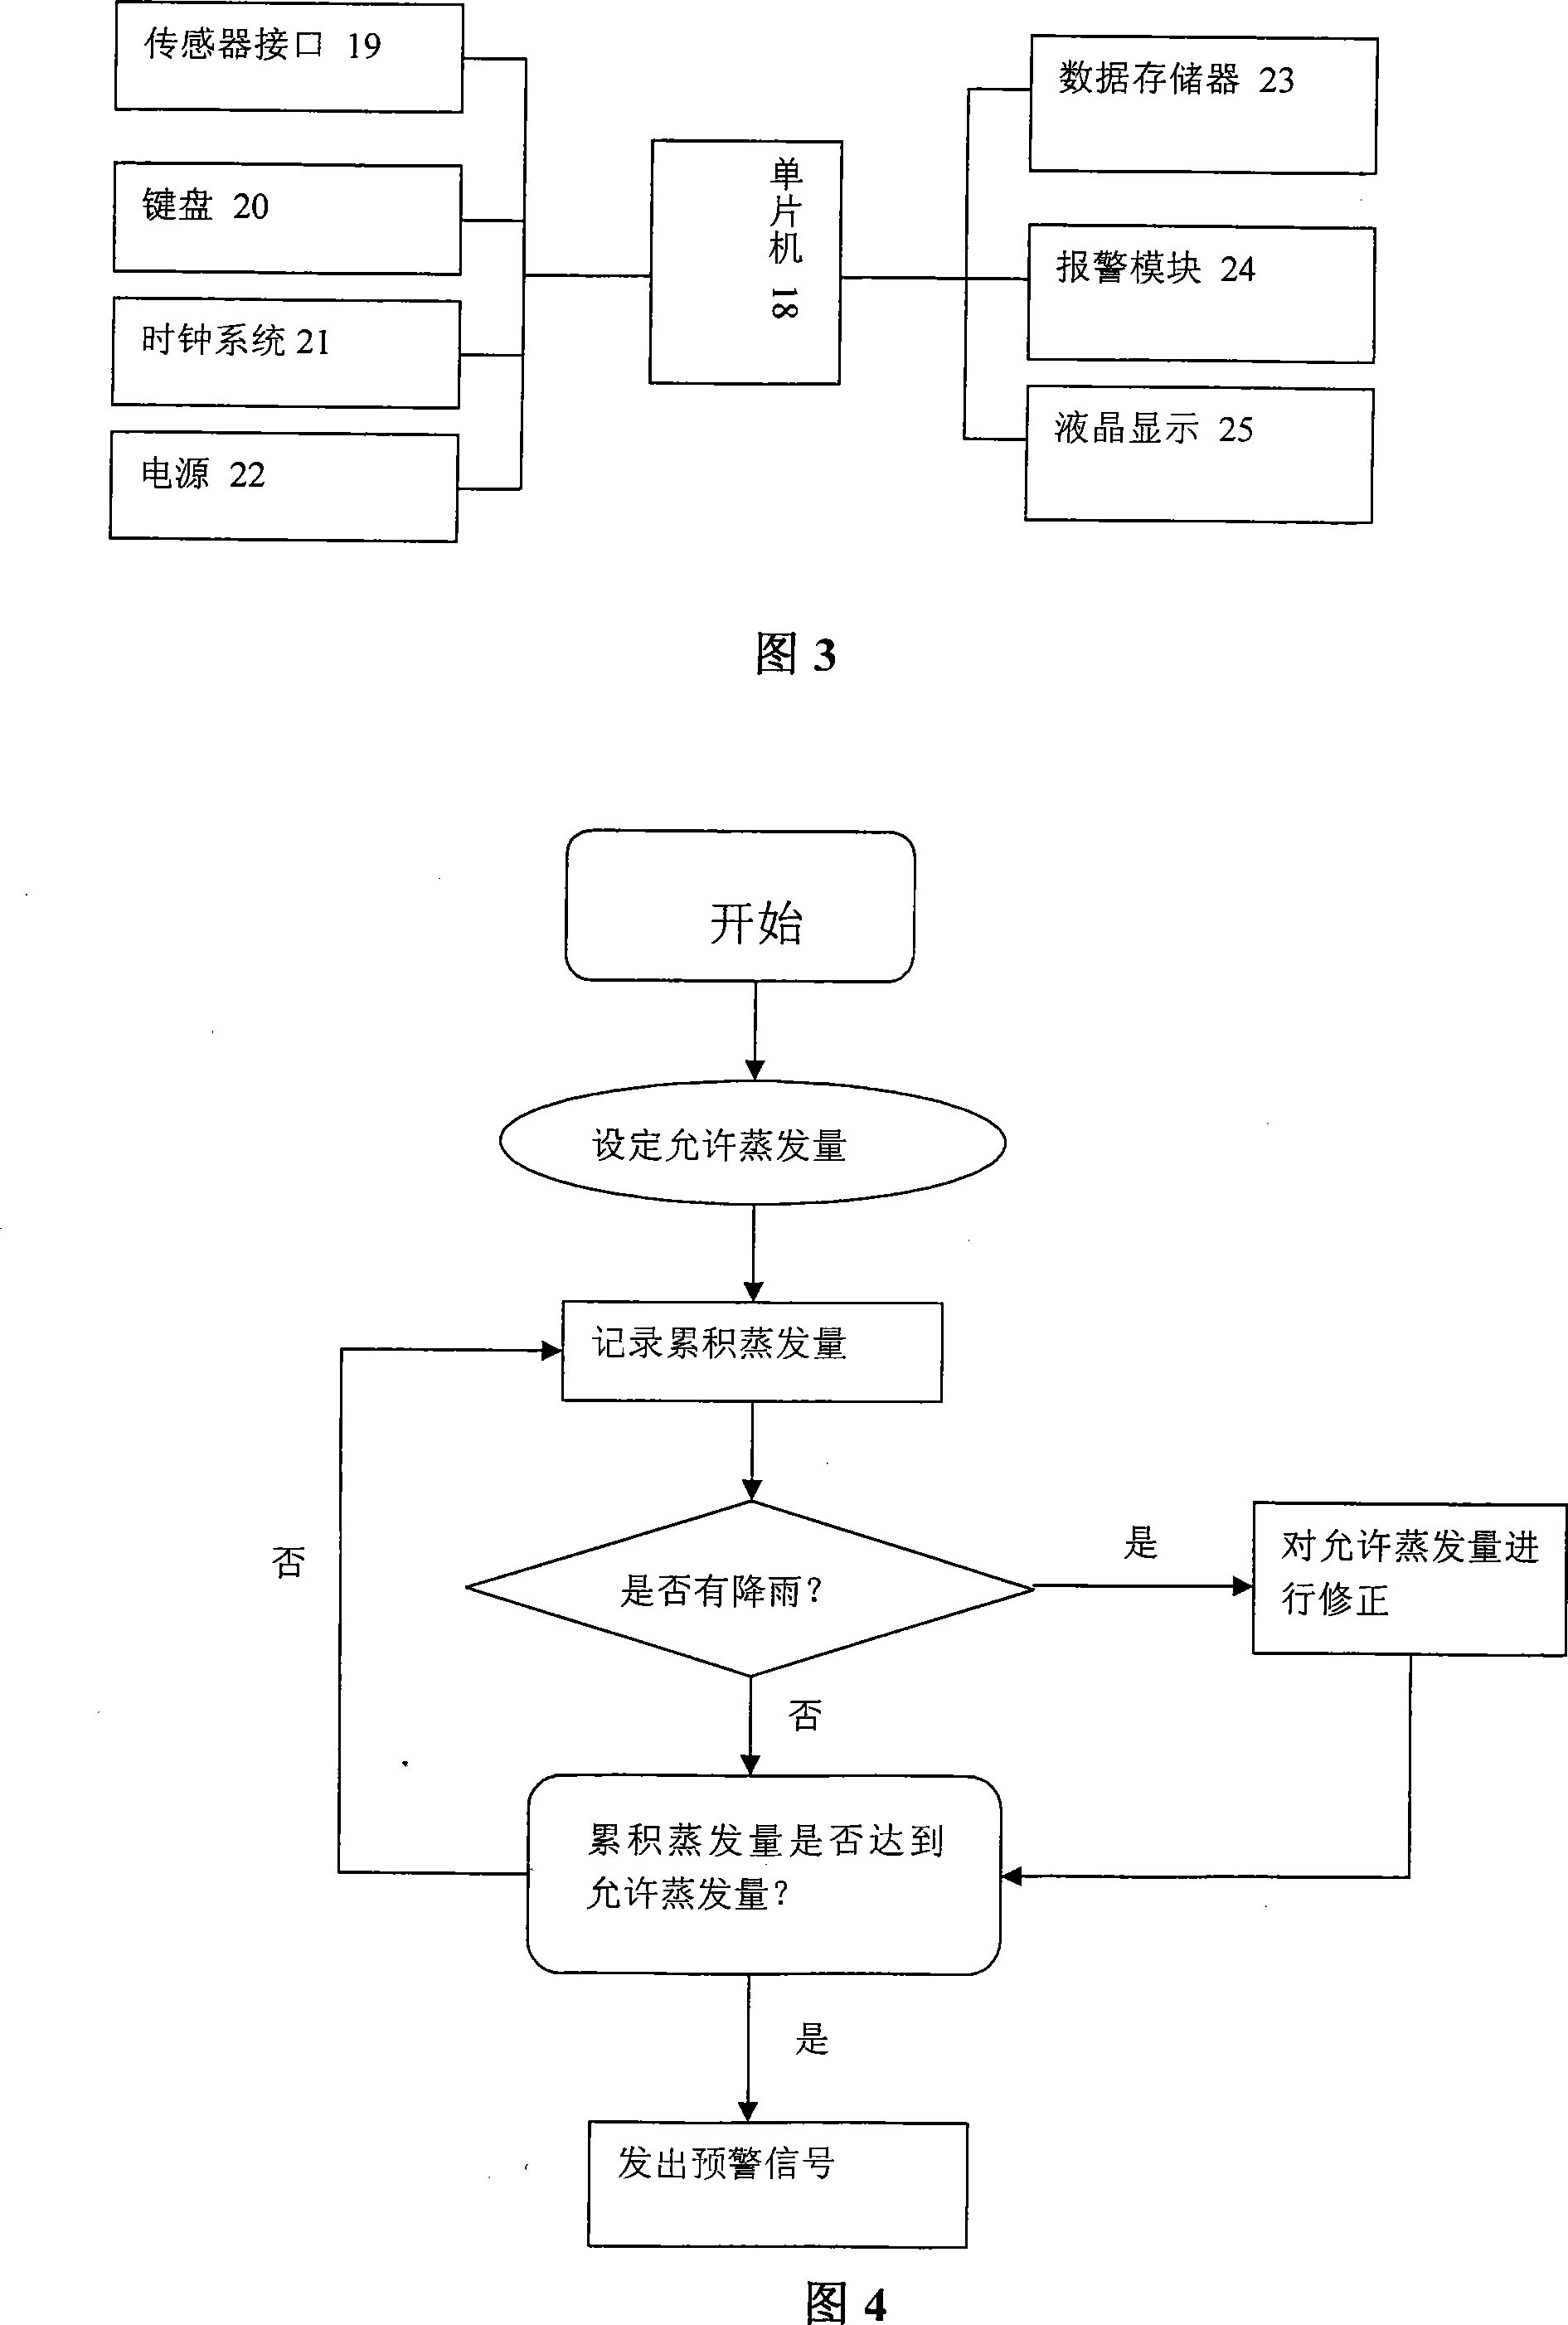 Evaporation based irrigation prealarming device and its operation method